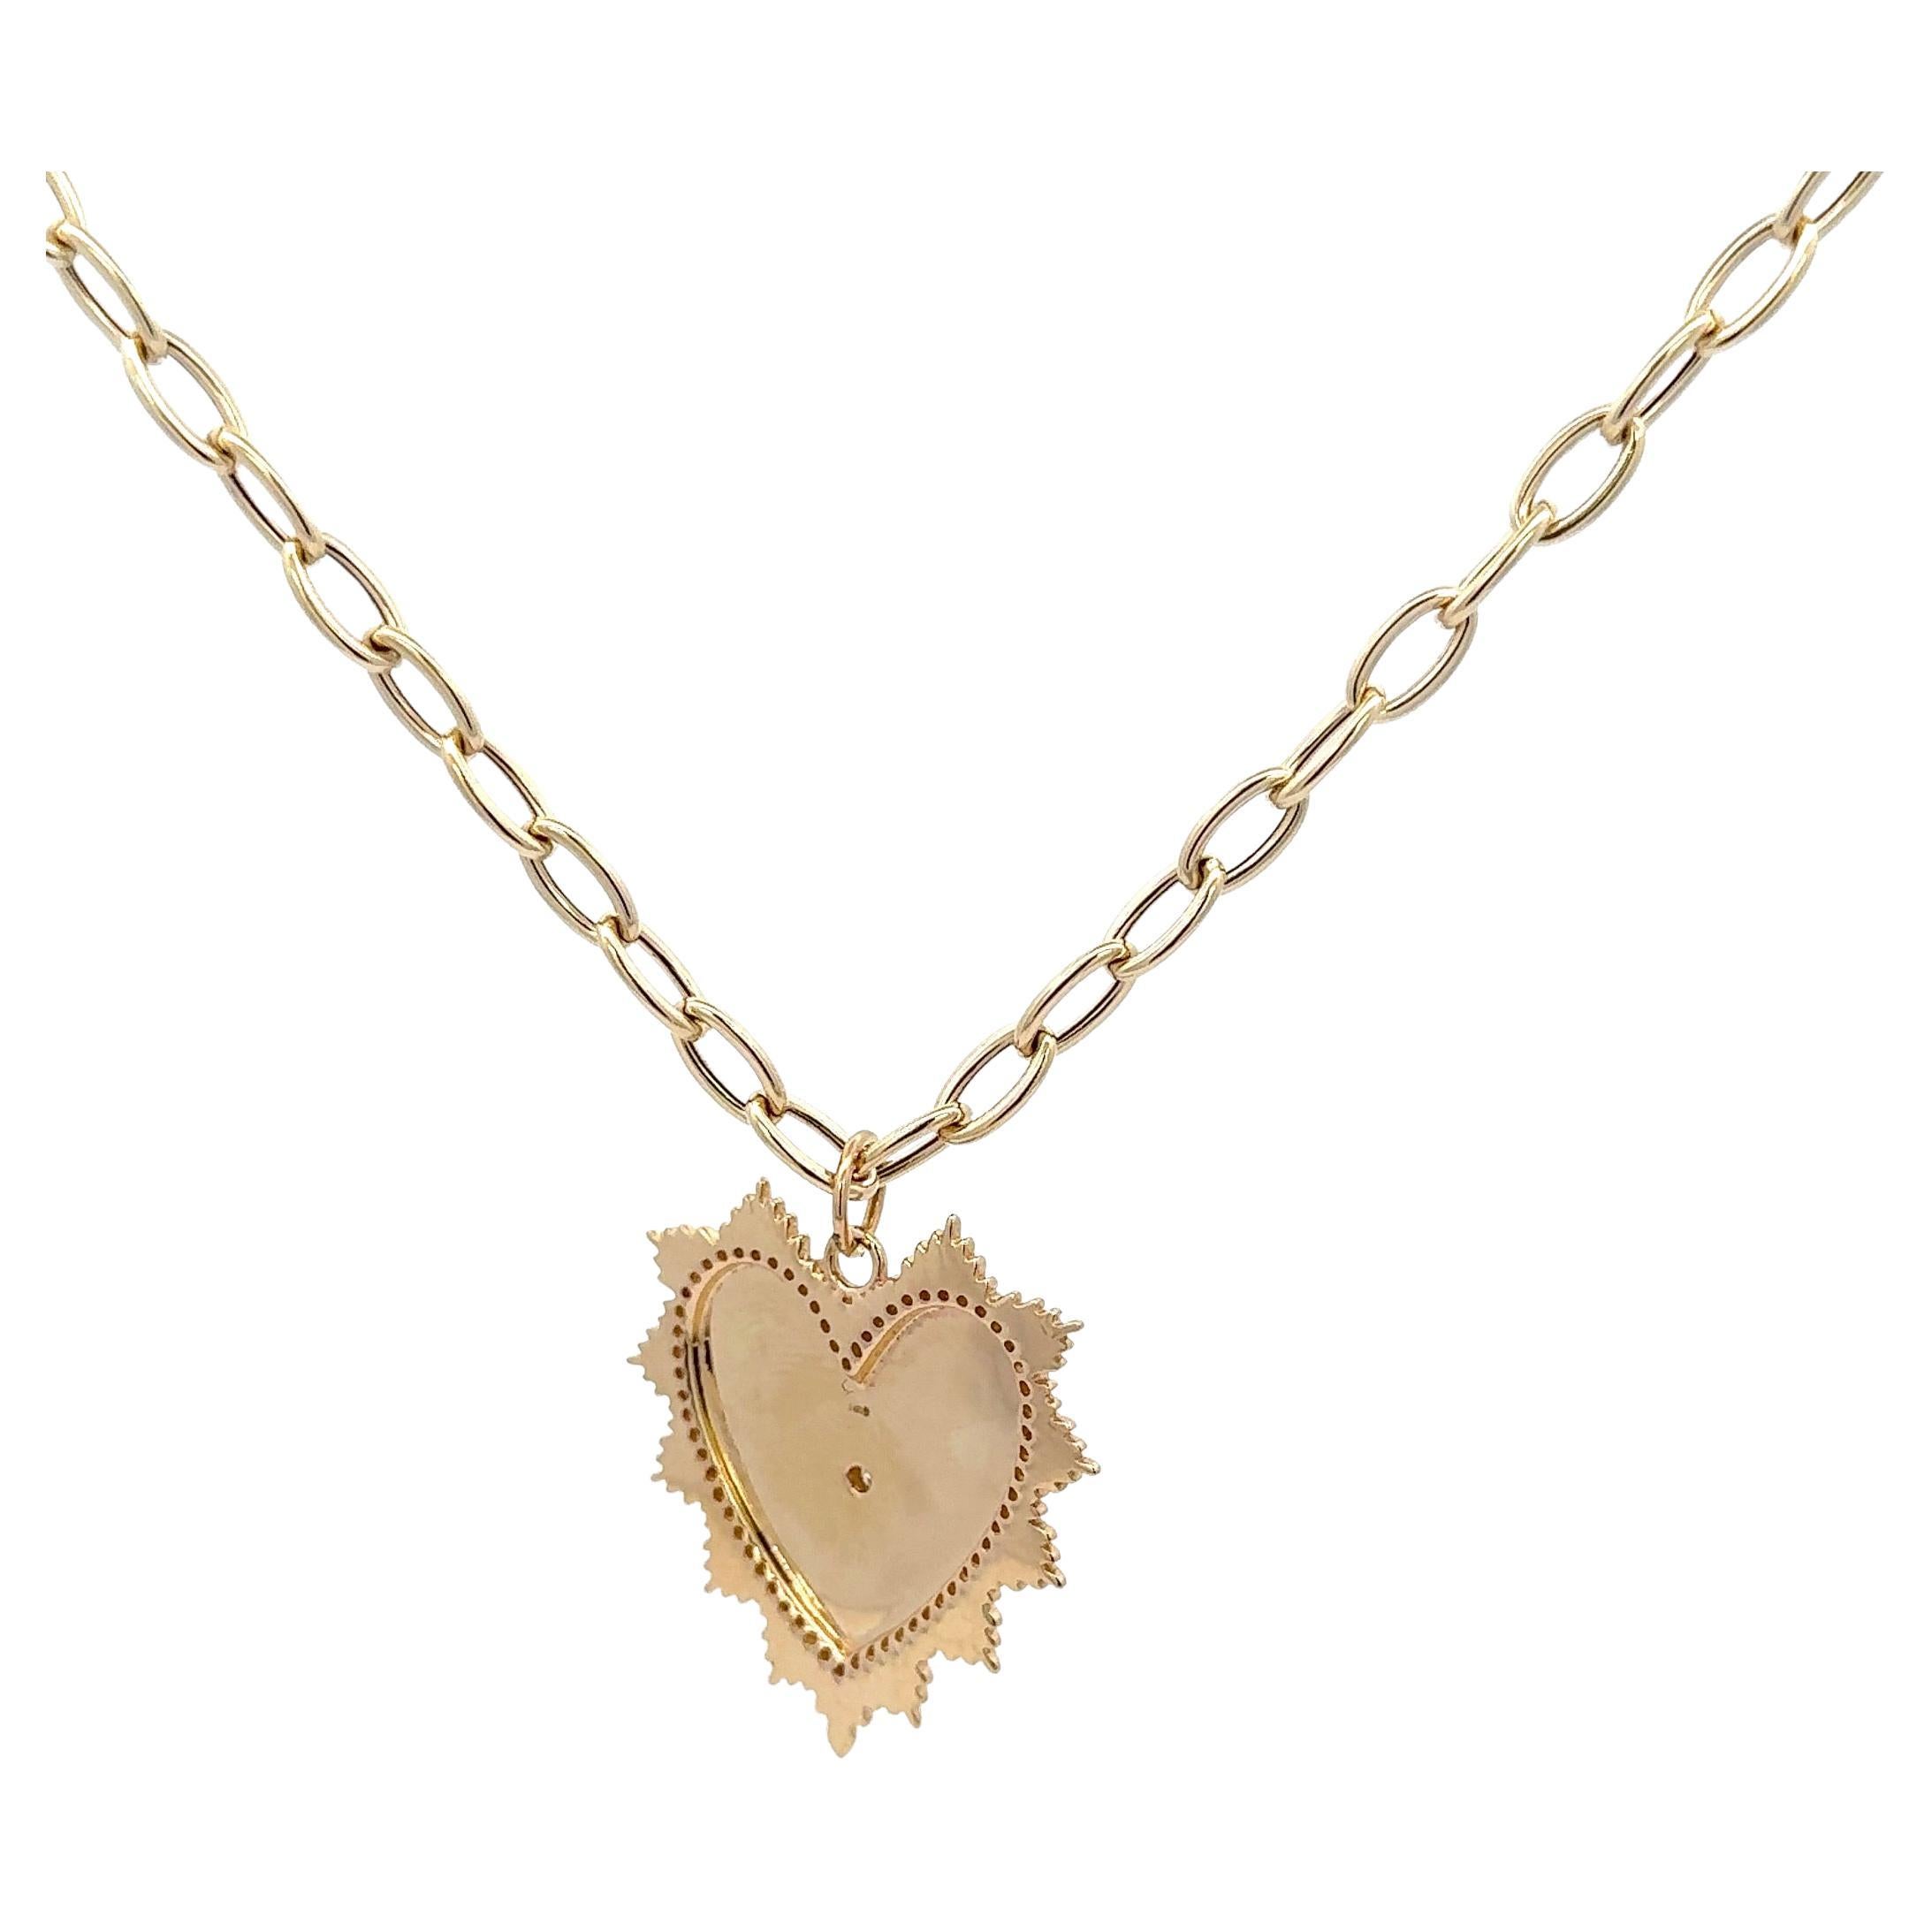 Italian made, this Vintage inspired heart pendant features an outline of round brilliants on an oval link chain, 18 inches.
Heart 1.13 inches length x 1.13 inches wide
Oval Link 7.4 mm x 4.4 mm wide

Chain & pendant can be sold separately
DM for